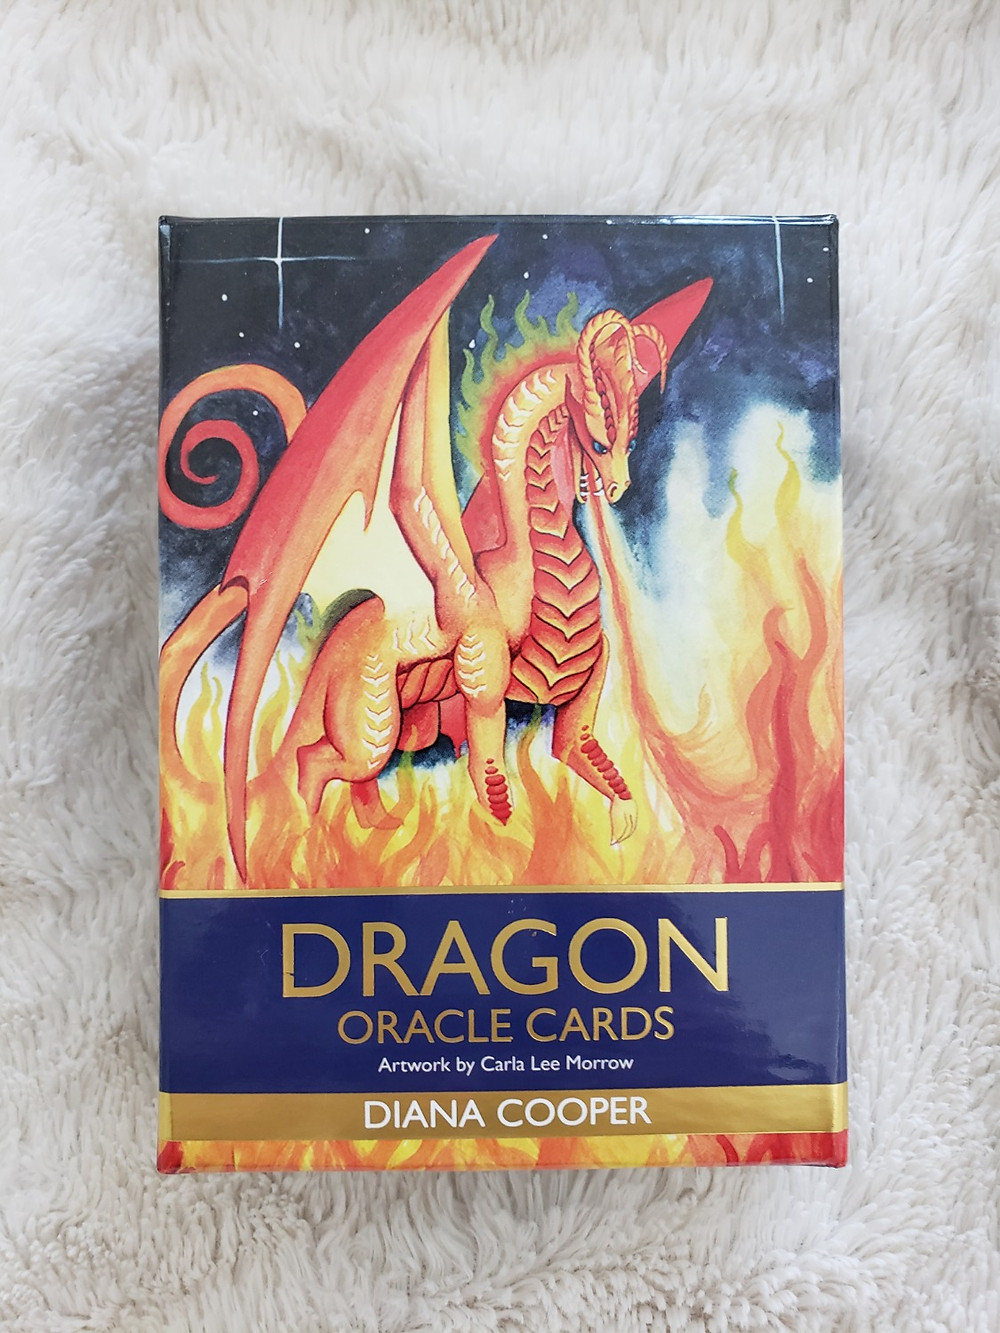 Dragon oracle cards, with a bright orange dragon on the front of the box.